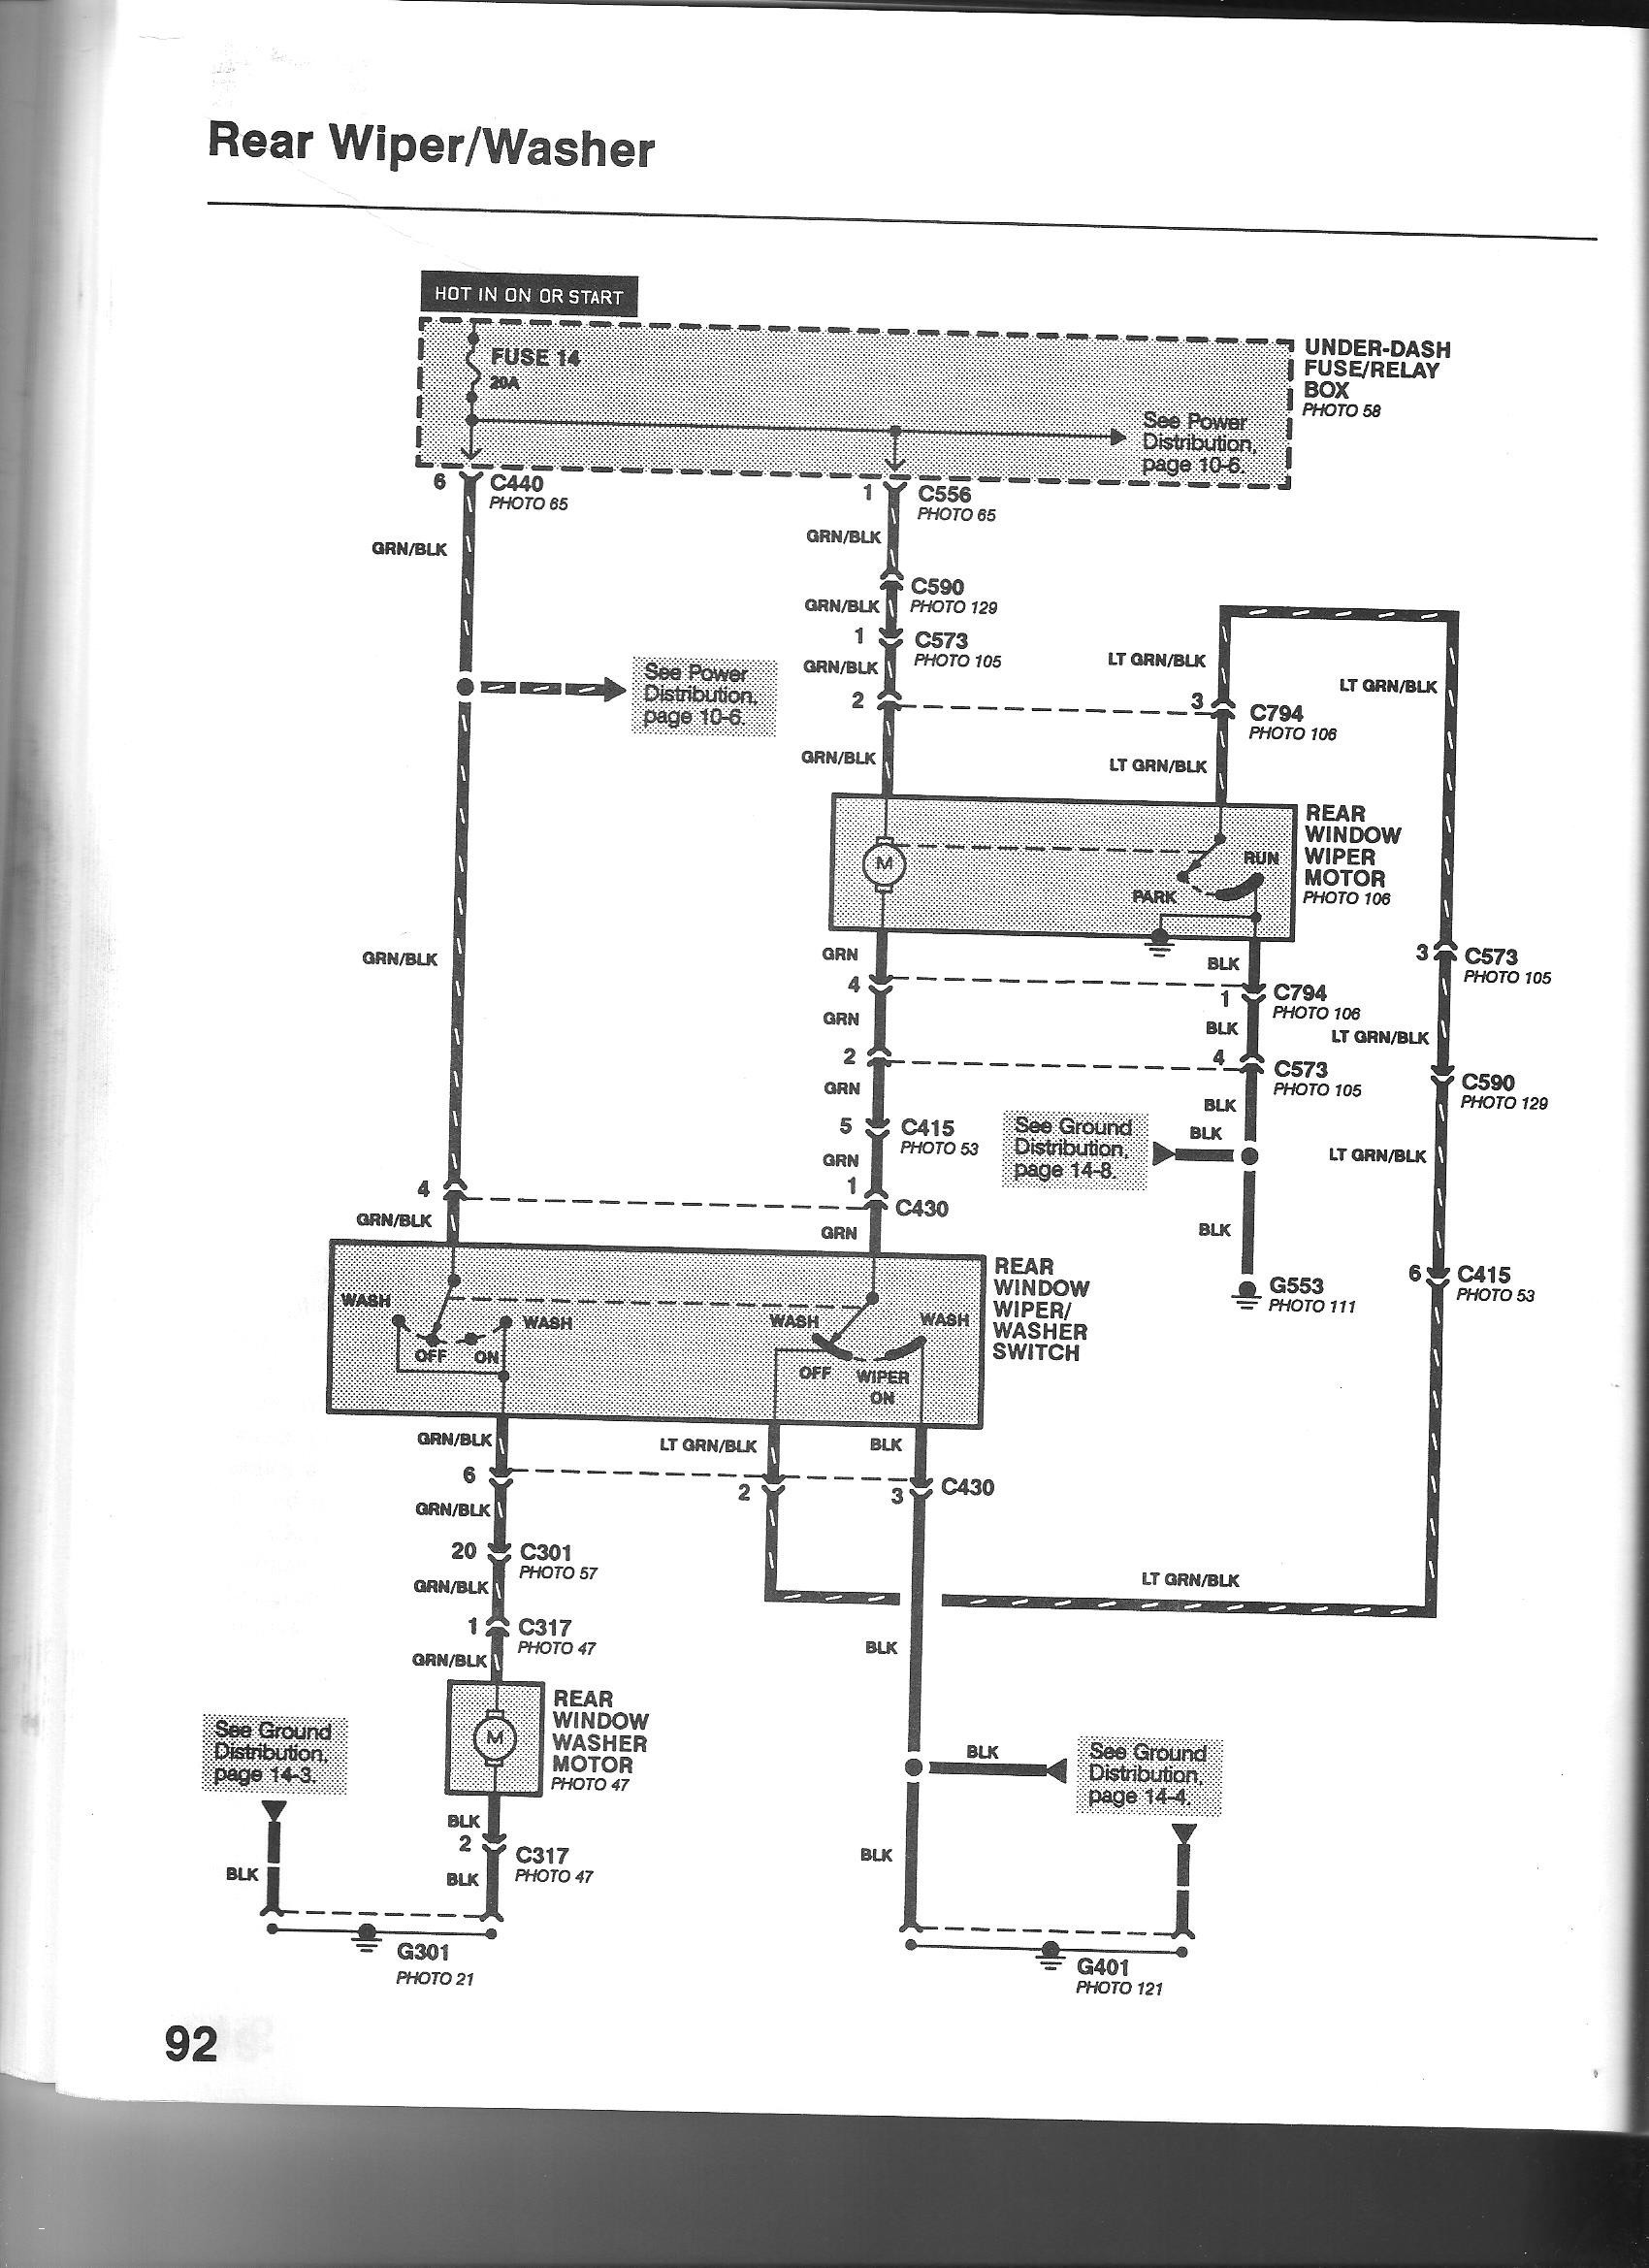 Trend Rear Wiper Motor Wiring Diagram 46 How To Wire Two Amps Throughout